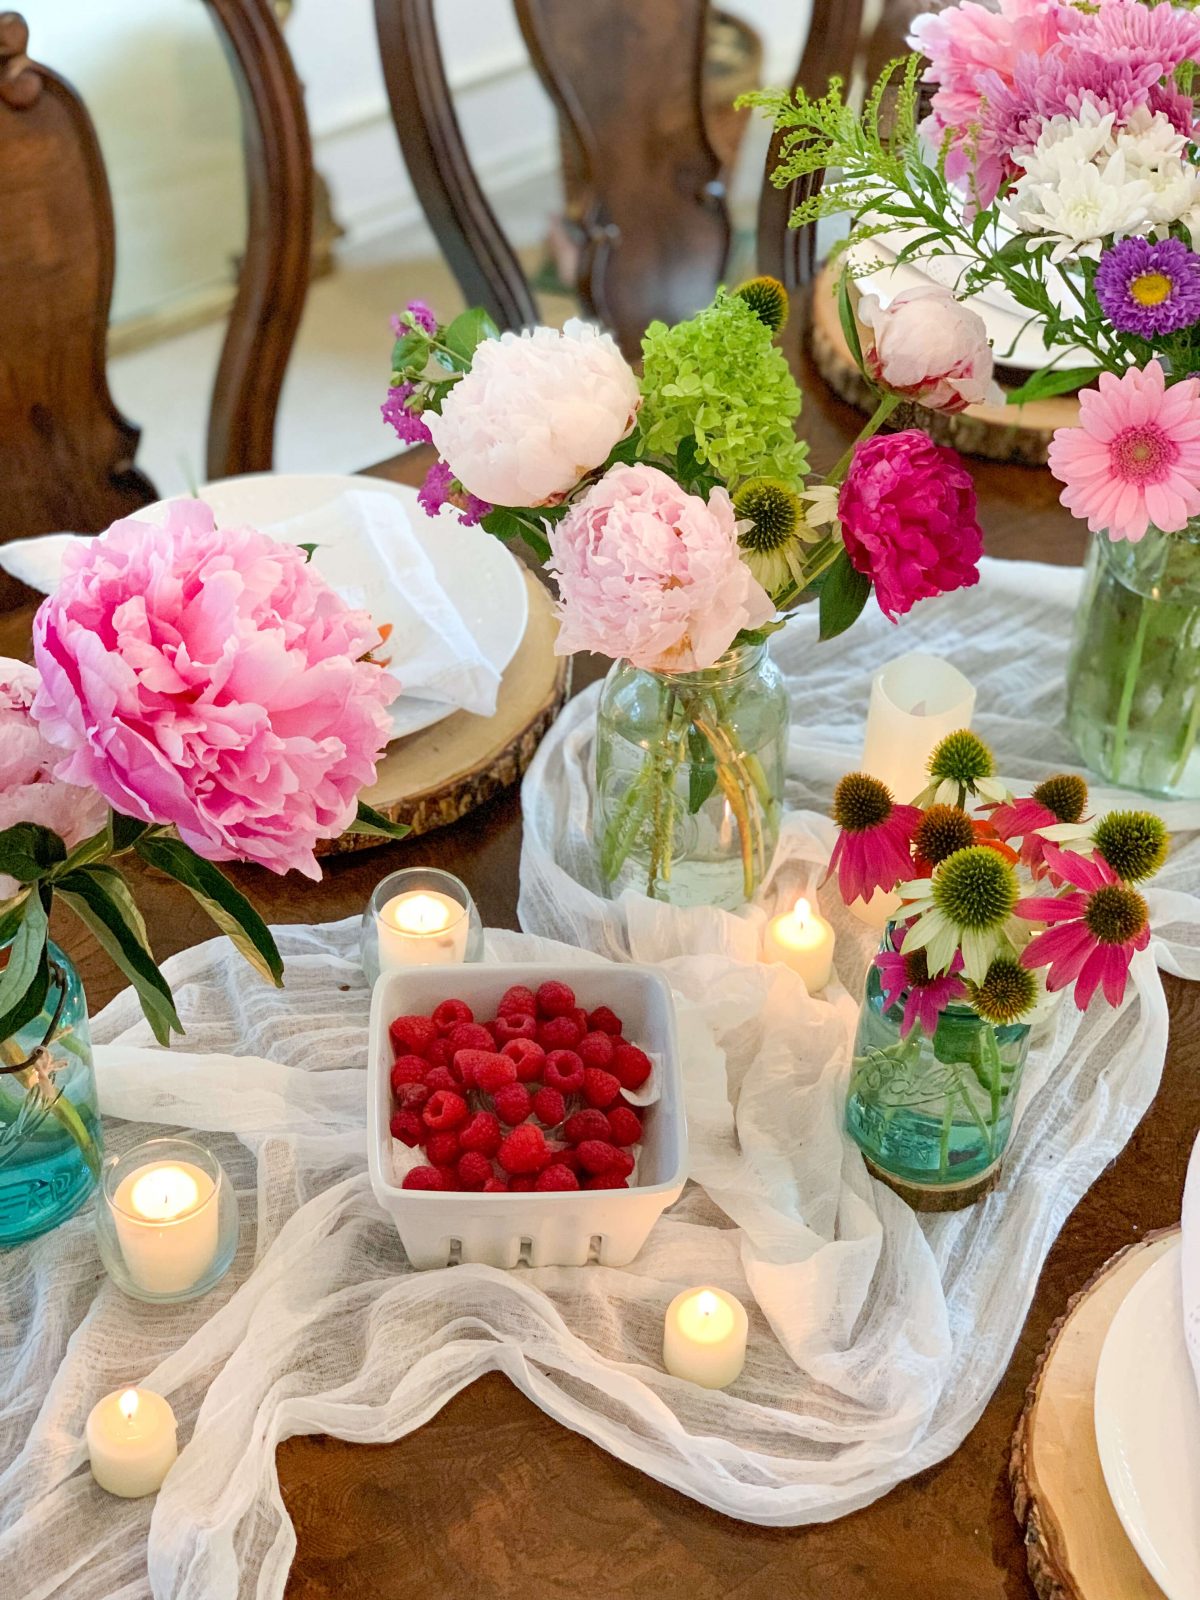 Red raspberries in a berry crate sit next to mason jar flower arrangements, lit candles and rustic place settings.